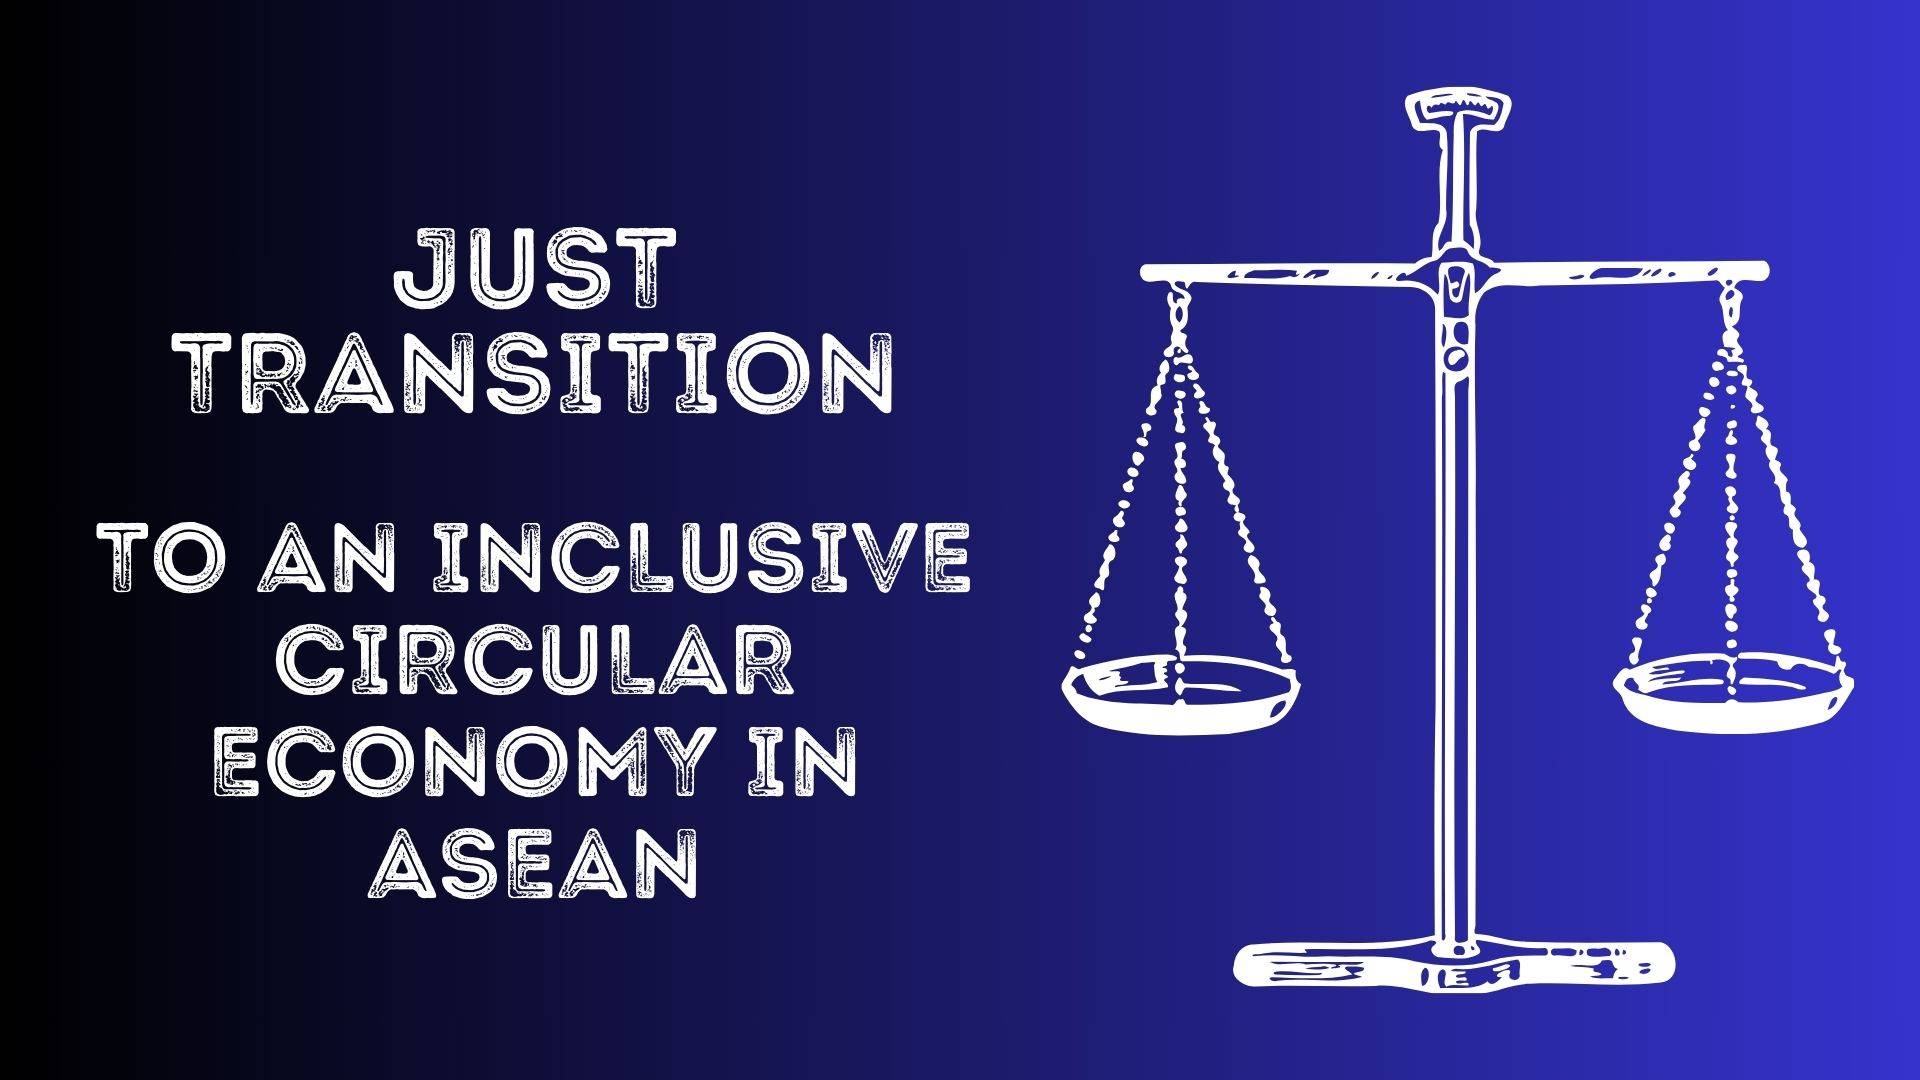 Just Transition to an Inclusive Circular Economy in ASEAN4157